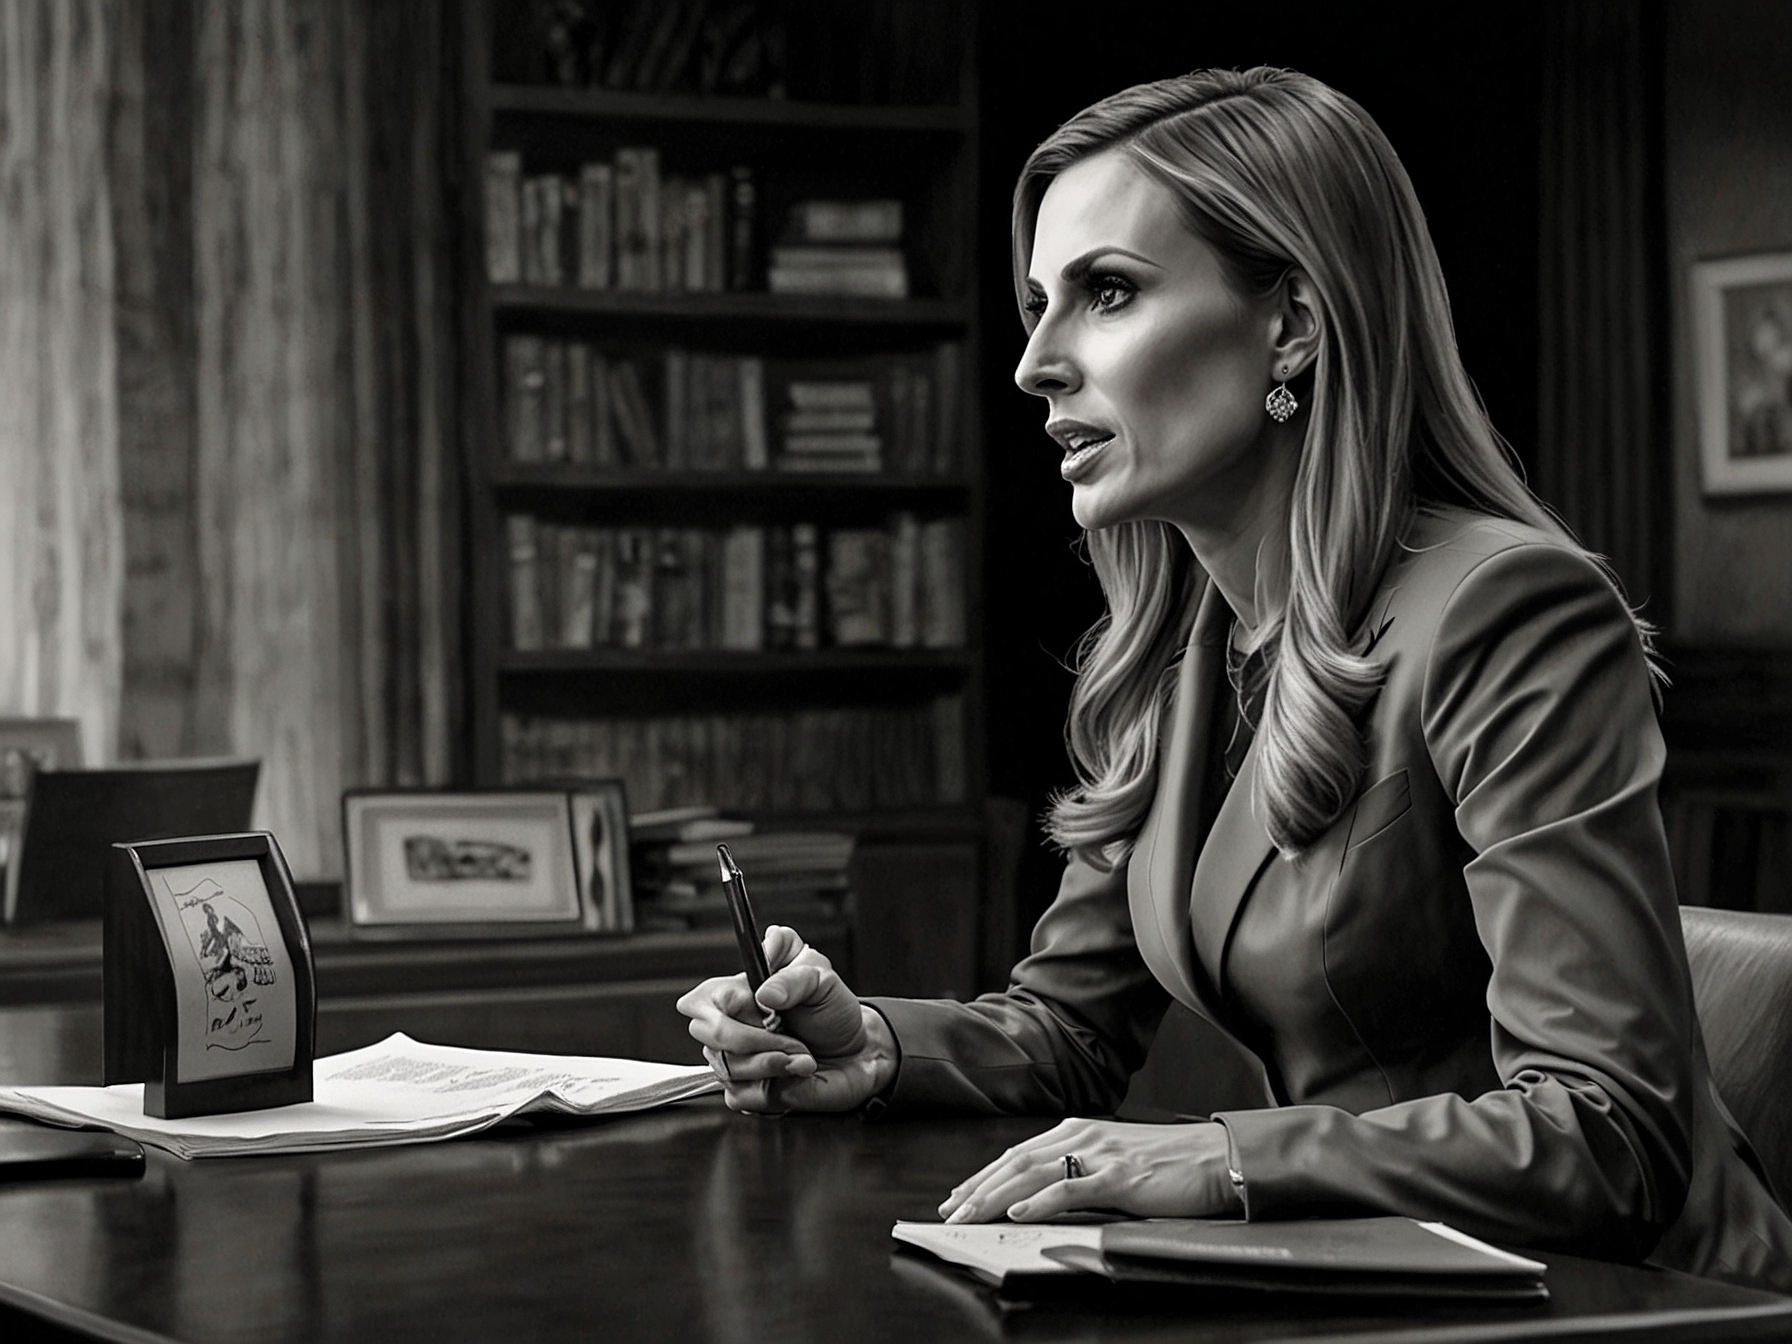 An illustration of Lara Trump speaking during a televised interview, making bold claims about Donald Trump’s presidency, which were later fact-checked and challenged.